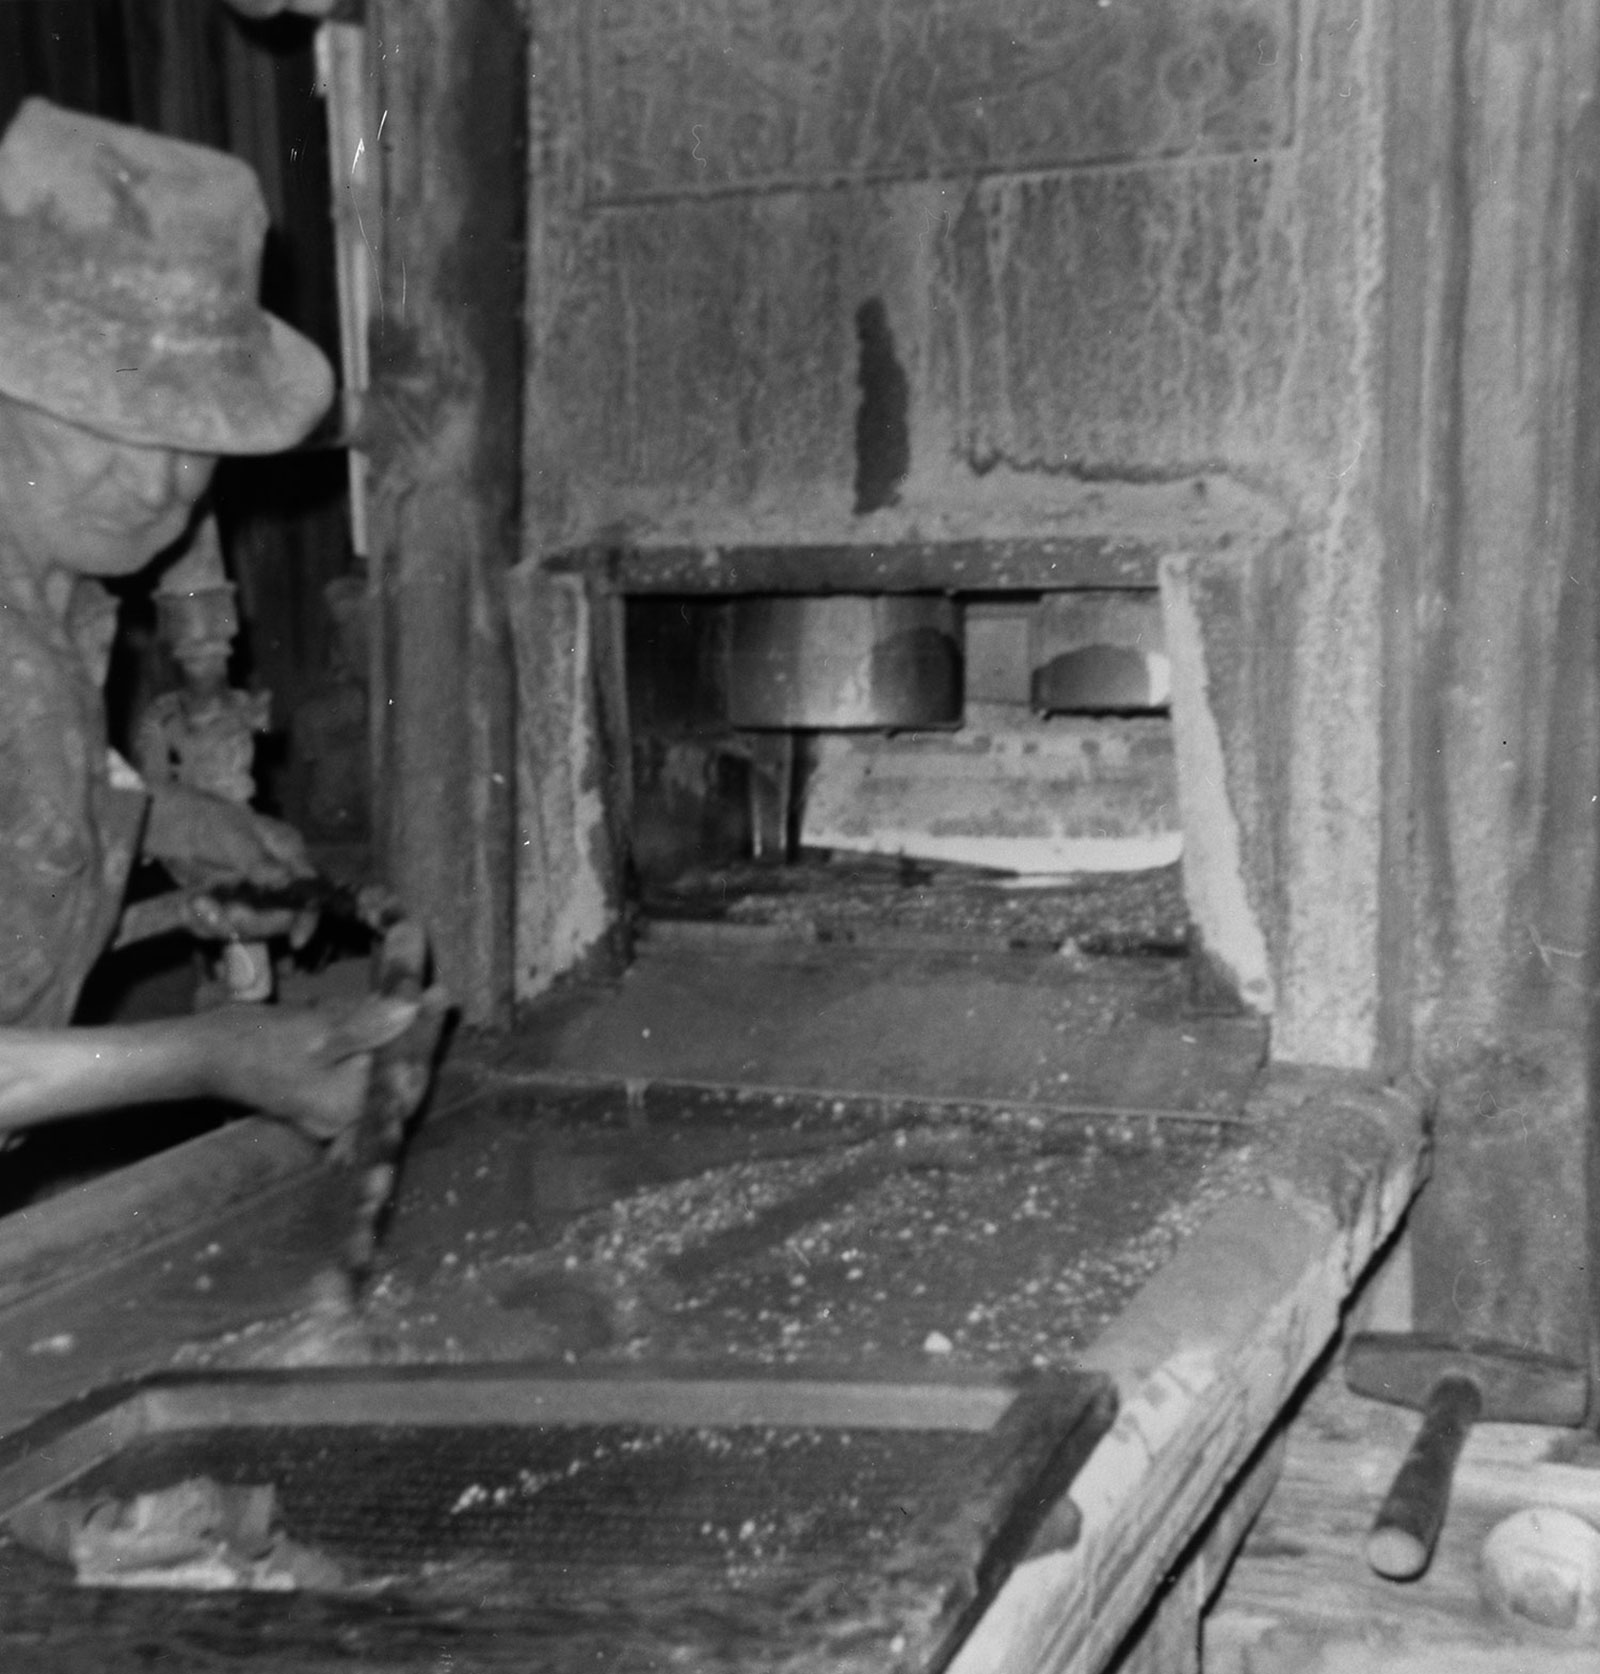 Historic Photograph showing Bill Keys Cleaning Up after the Mill Run (Note Screen from Mortar Setting on Table, Stamps are Hung Up). - Wall Street Gold Mill, Twentynine Palms, San Bernardino County, CA
